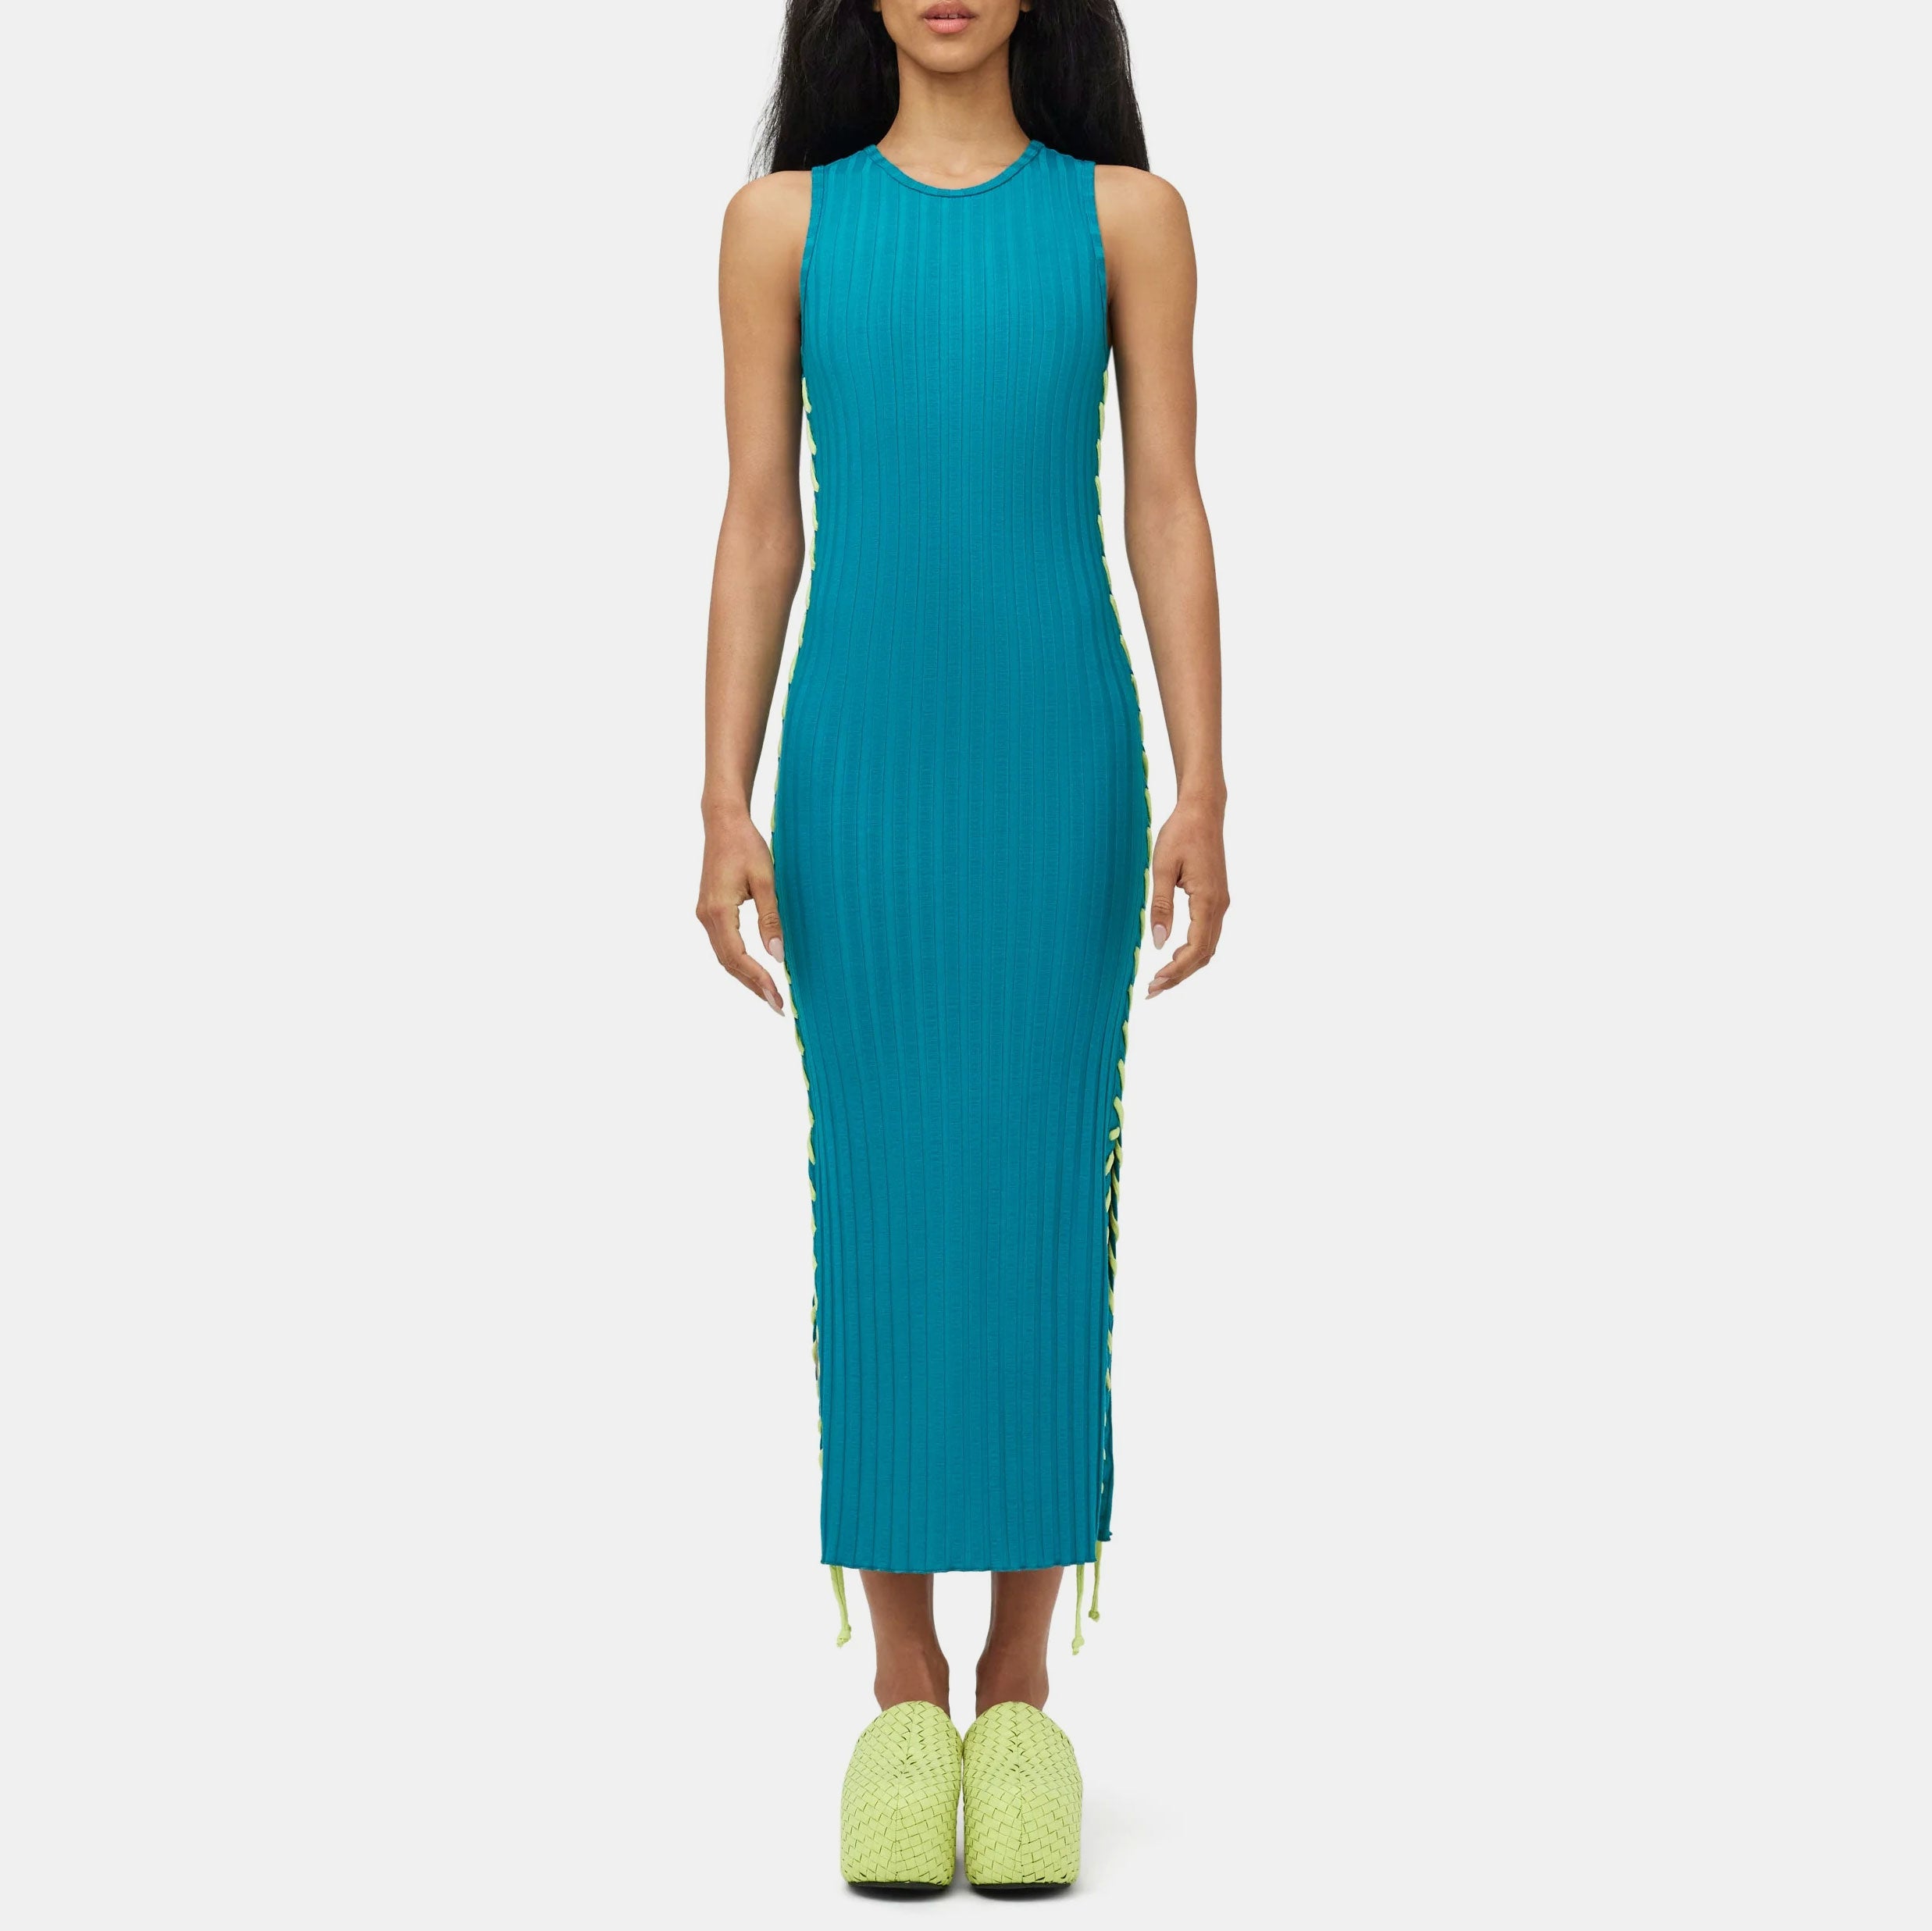 Full body photo of model wearing the teal green ribbed Blix Dress, a sleeveless ribbed dress with fluorescent green oversized stitching detail along the sides - front view.